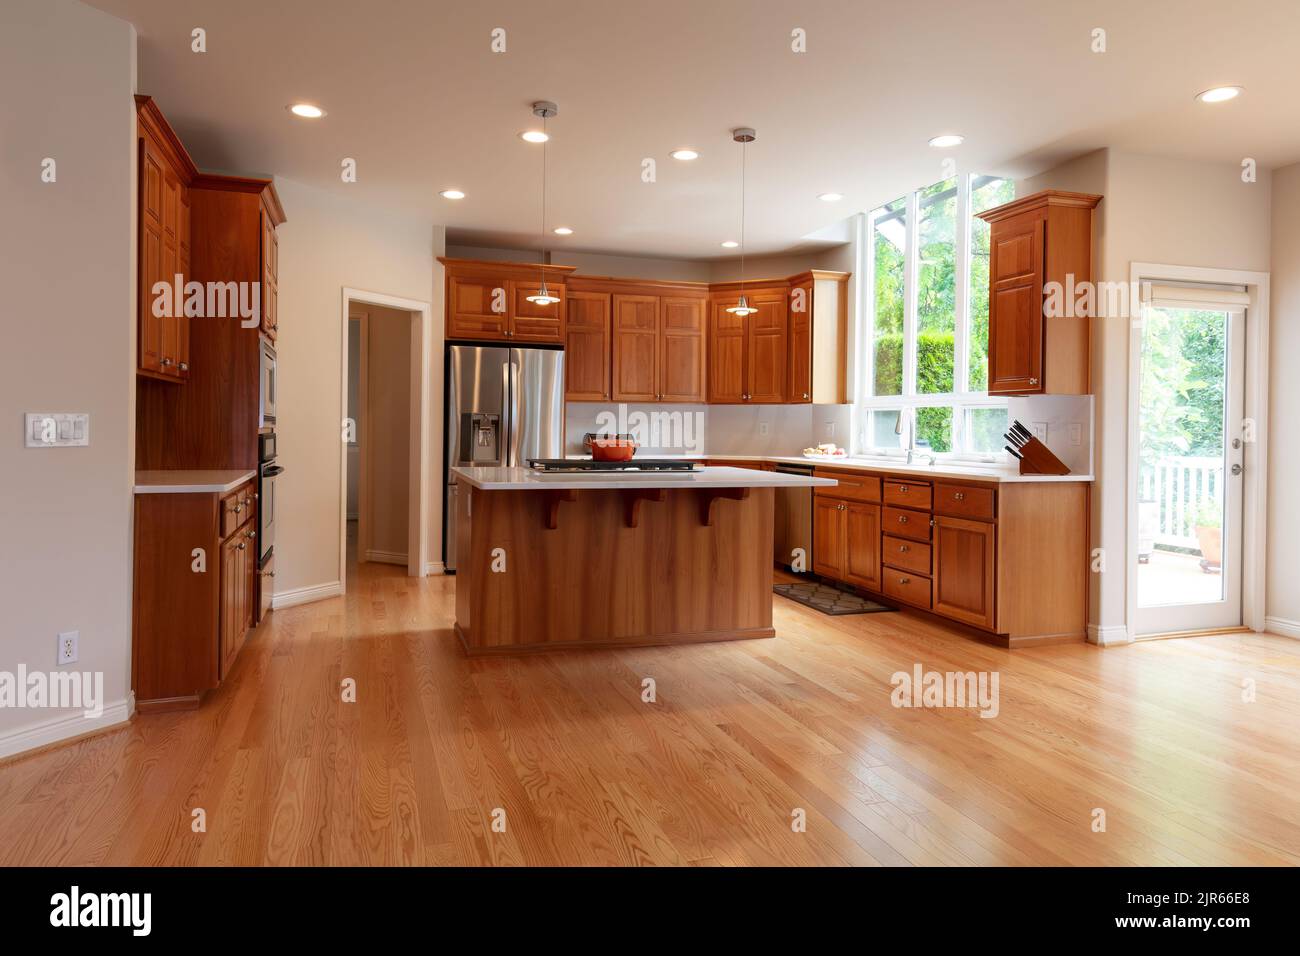 Remodeled kitchen in luxury home with island plus built in stove top, pendant lights, real red oak hardwood floors, cherry cabinets and stainless stee Stock Photo